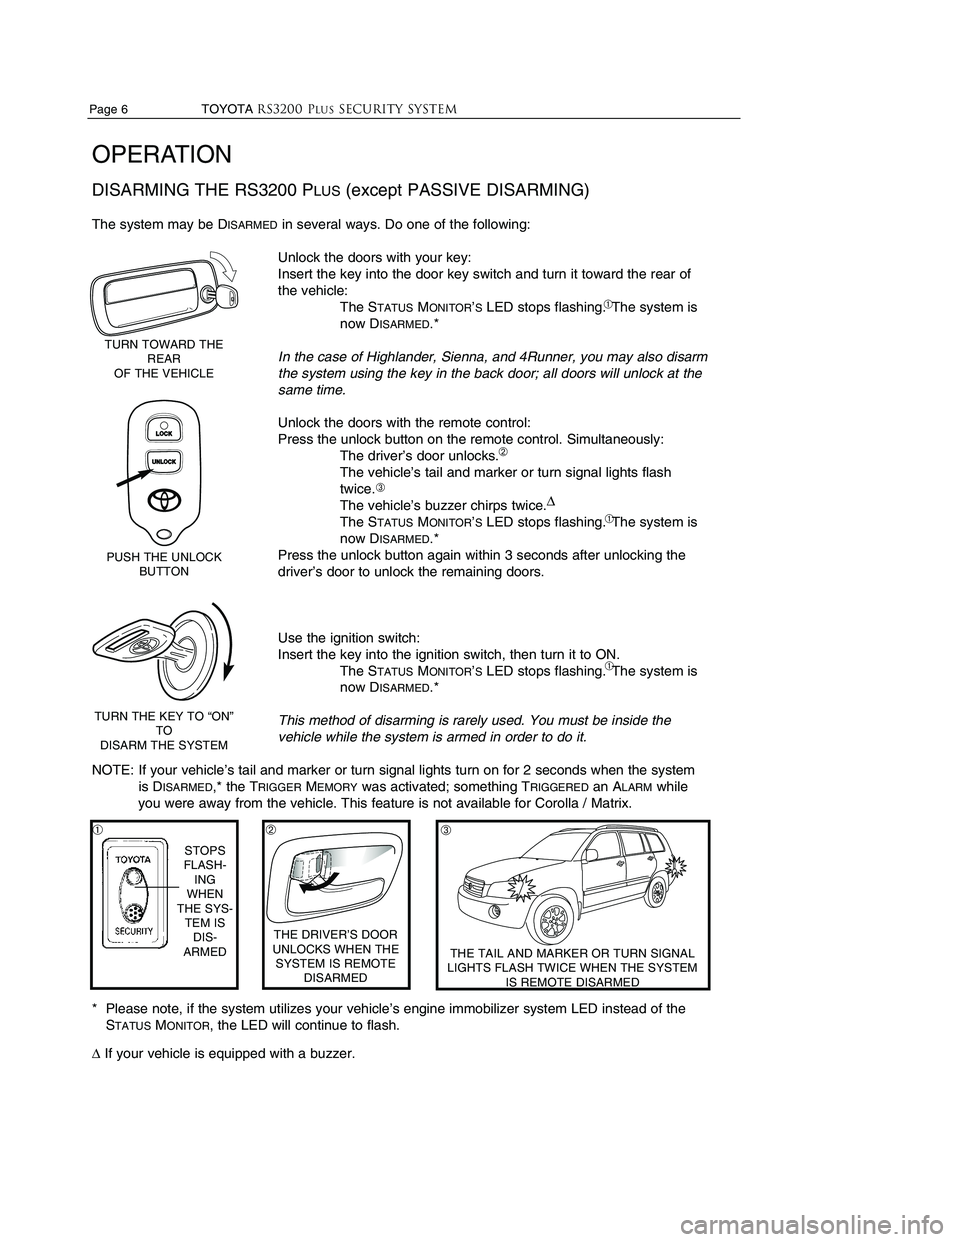 TOYOTA SOLARA 2002  Accessories, Audio & Navigation (in English) Page 6                    TOYOTARS3200 PLUSSecurity system
OPERATION
DISARMING THE RS3200 PLUS(except PASSIVE DISARMING)
The system may be DISARMEDin several ways. Do one of the following: 
Unlock the